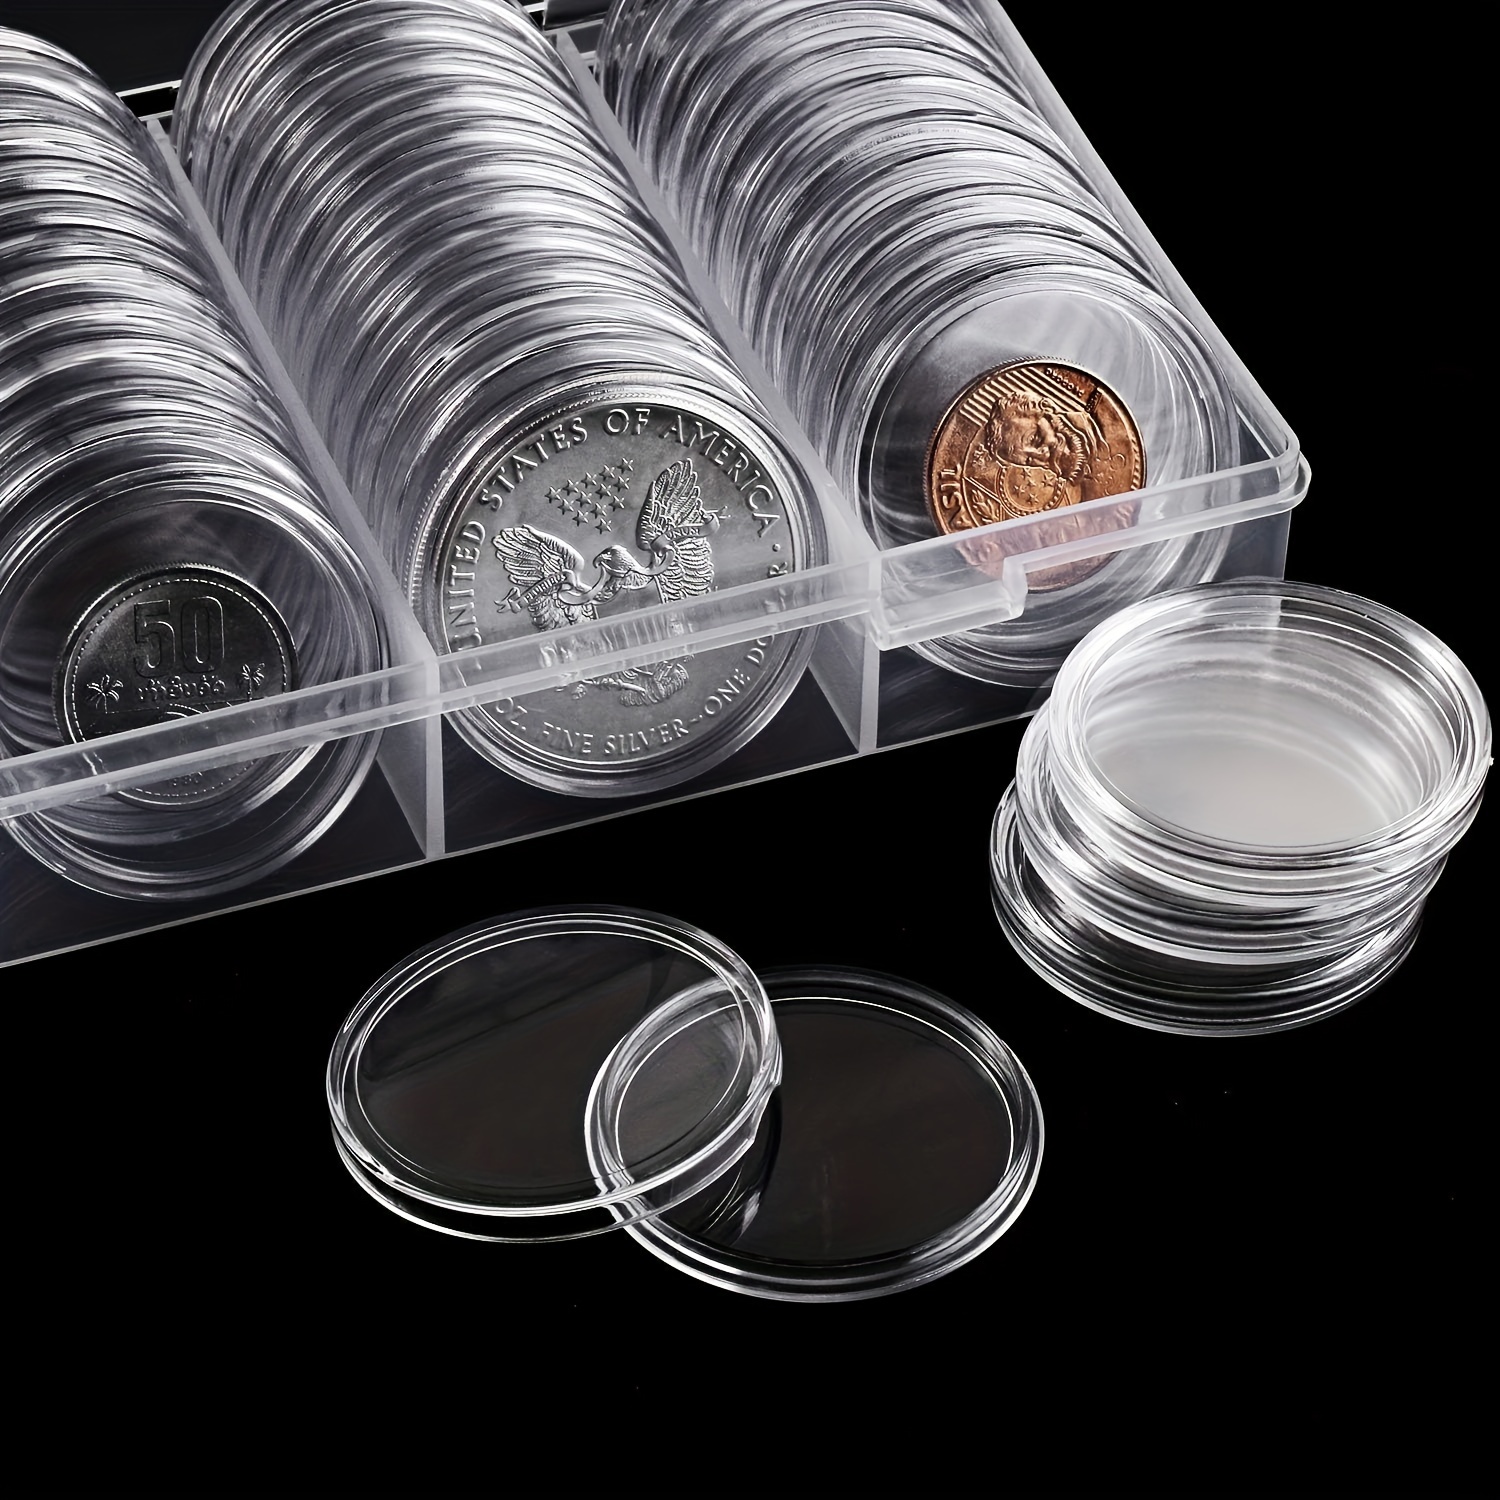 Hicarer 25 mm Coin Holder Capsules Clear Round Plastic Coin Container Case for Coin Collection Supplies (100)